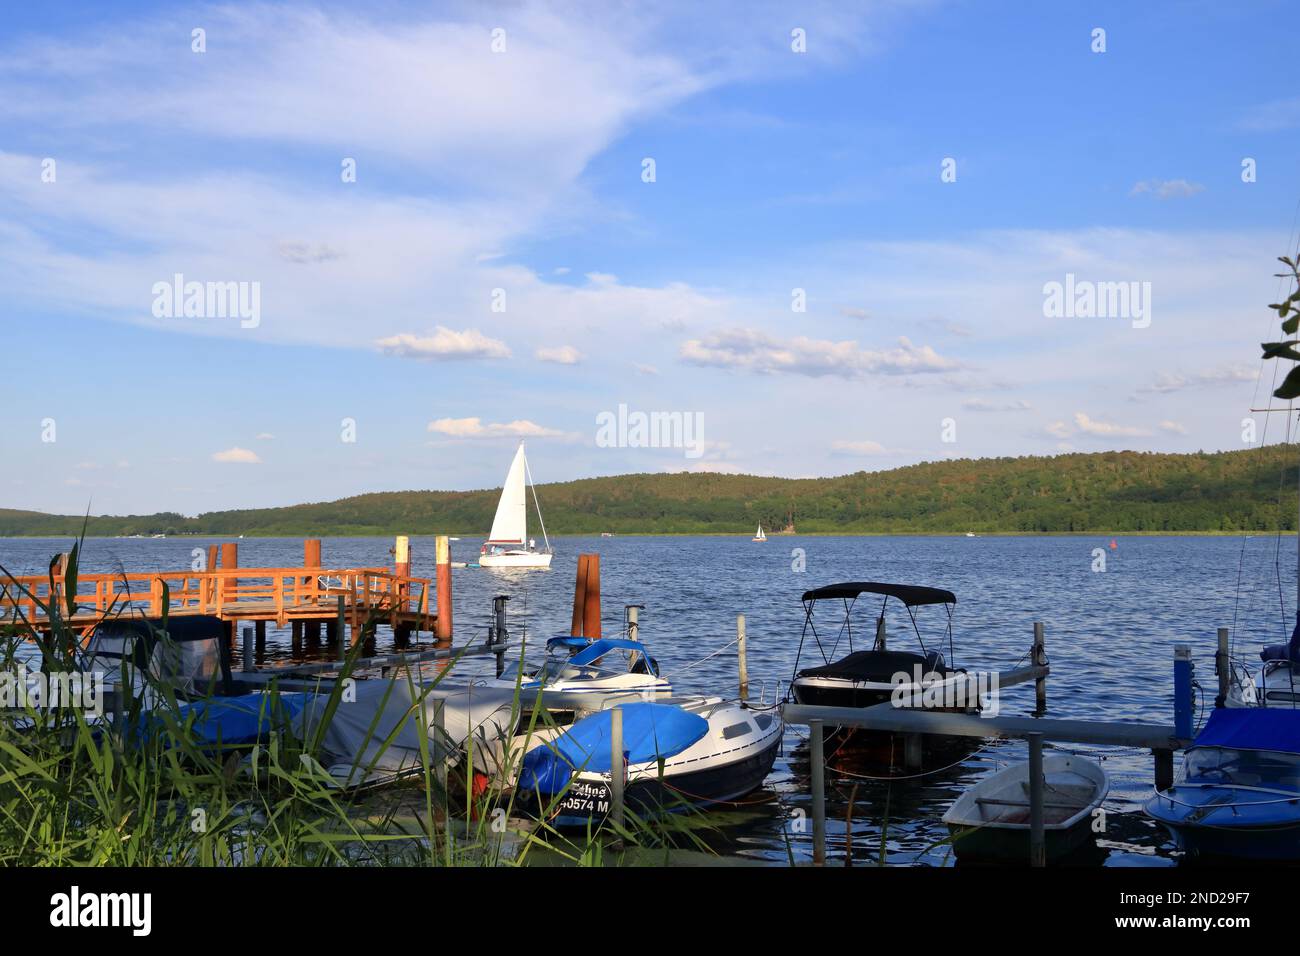 relaxed hustle and bustle on the Schwielowsee, Caputh, Petzow, Ferch, Werder/Havel in Germany Stock Photo